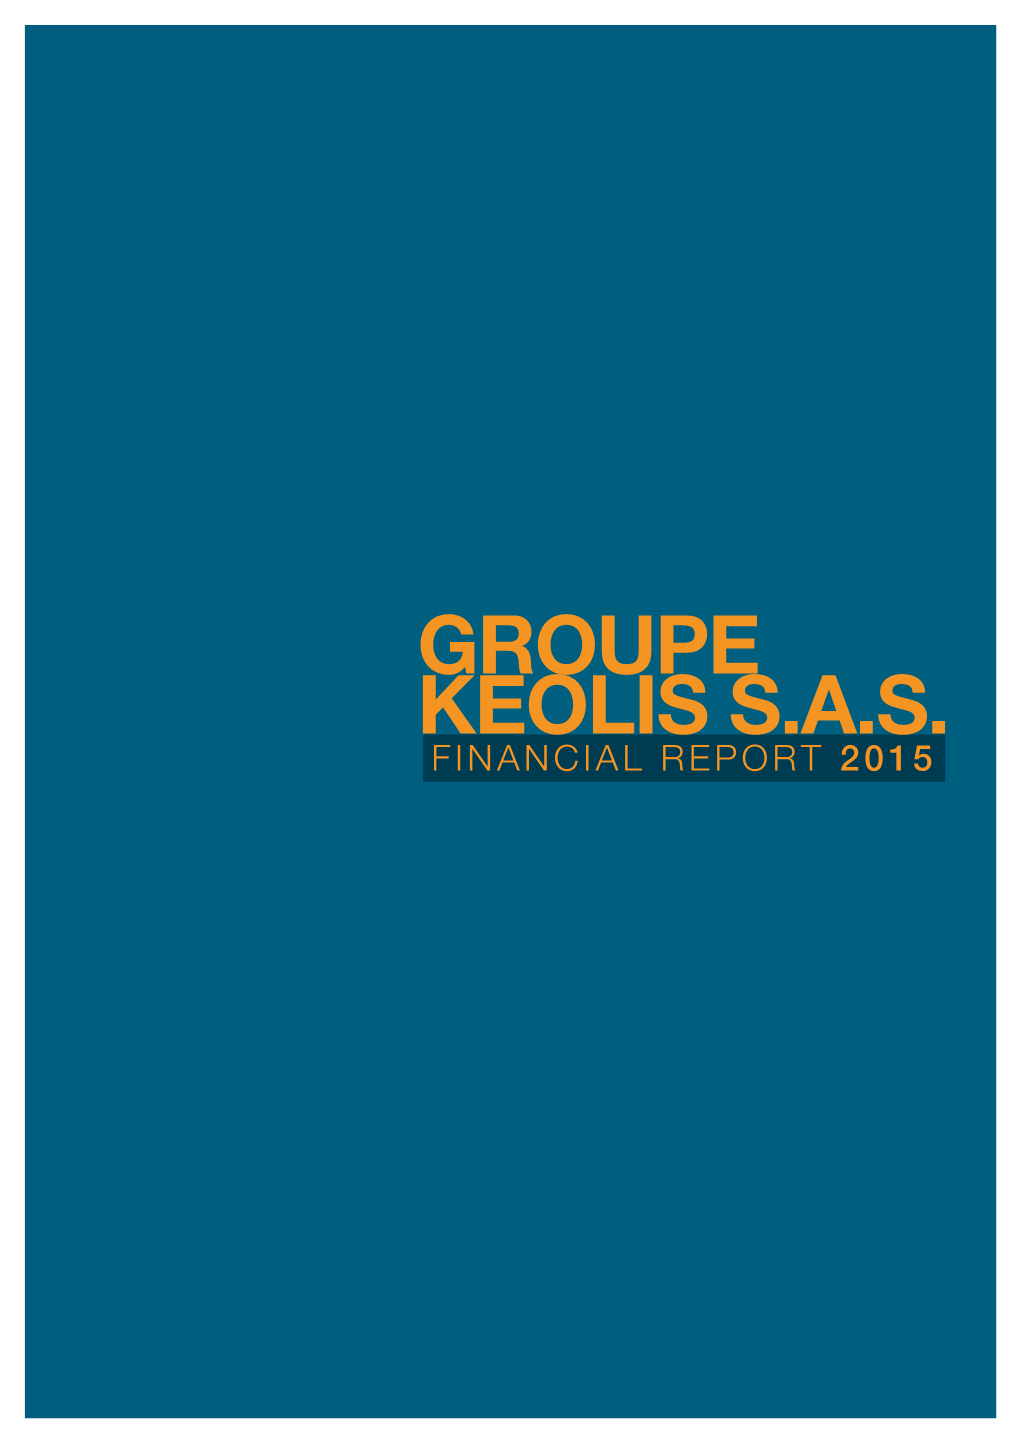 GROUPE Keolis S.A.S. FINANCIAL REPORT 2015 CONTENTS